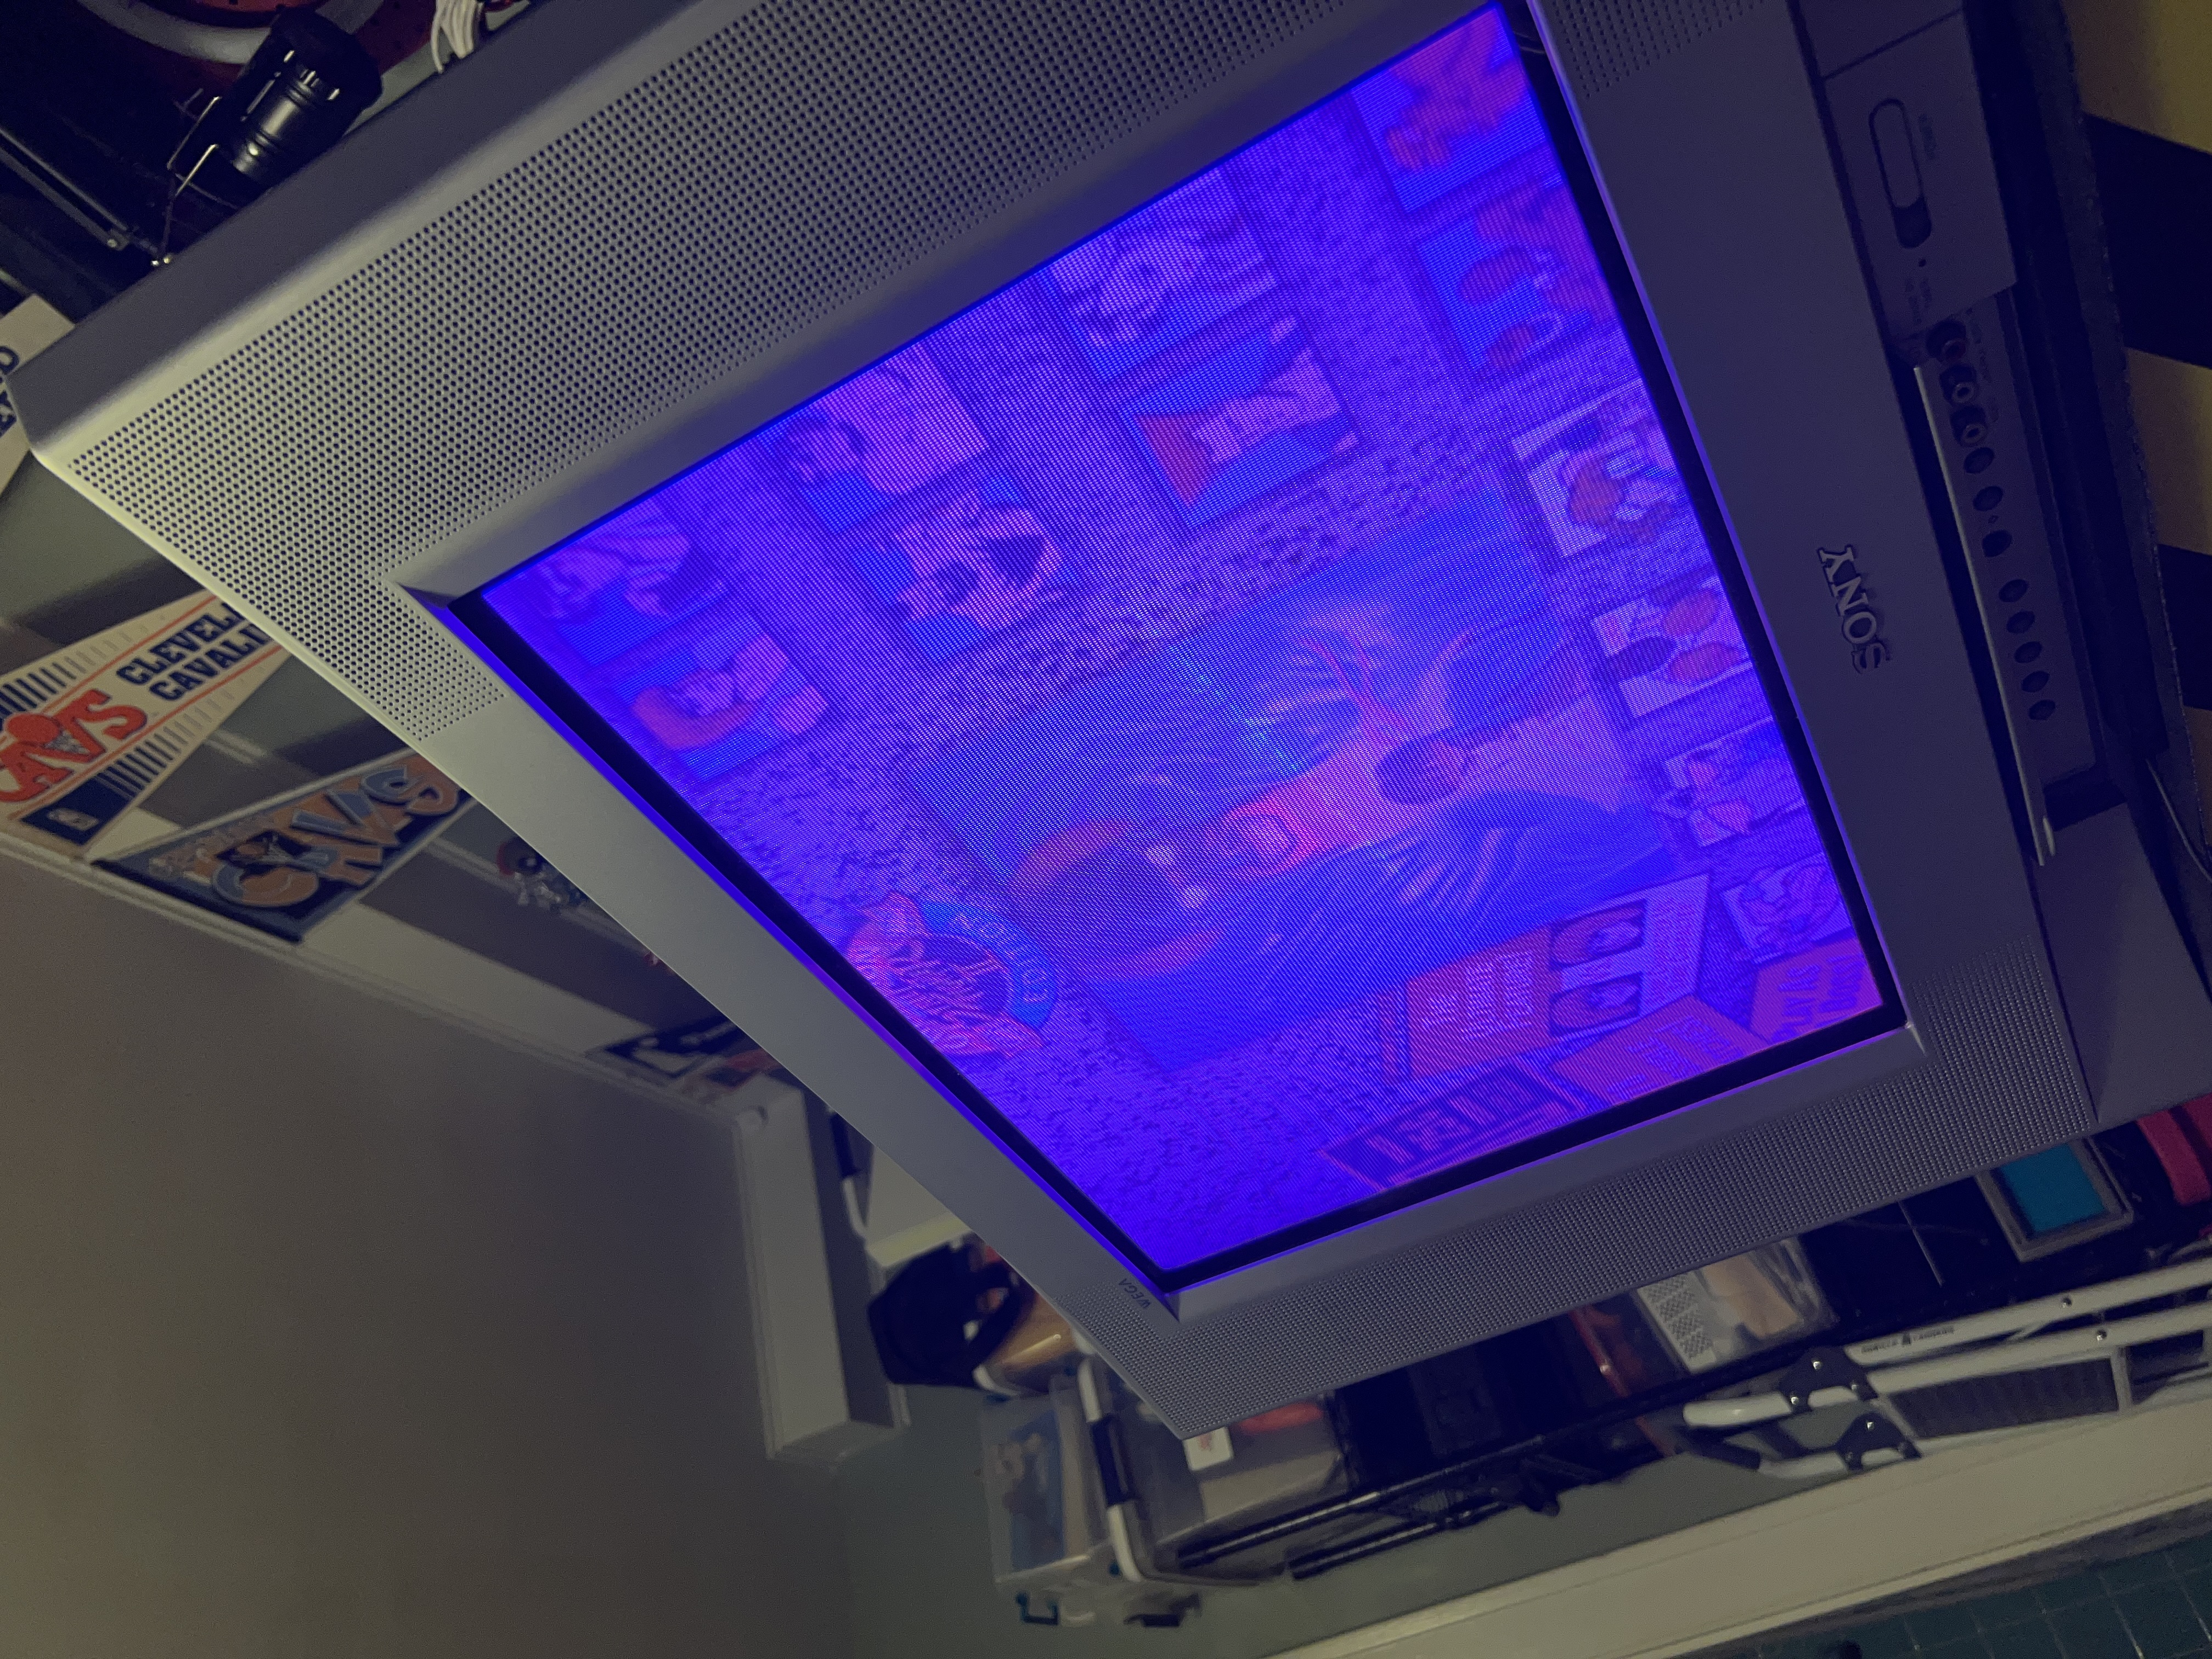 I get the same pink tint through Component on my CRT